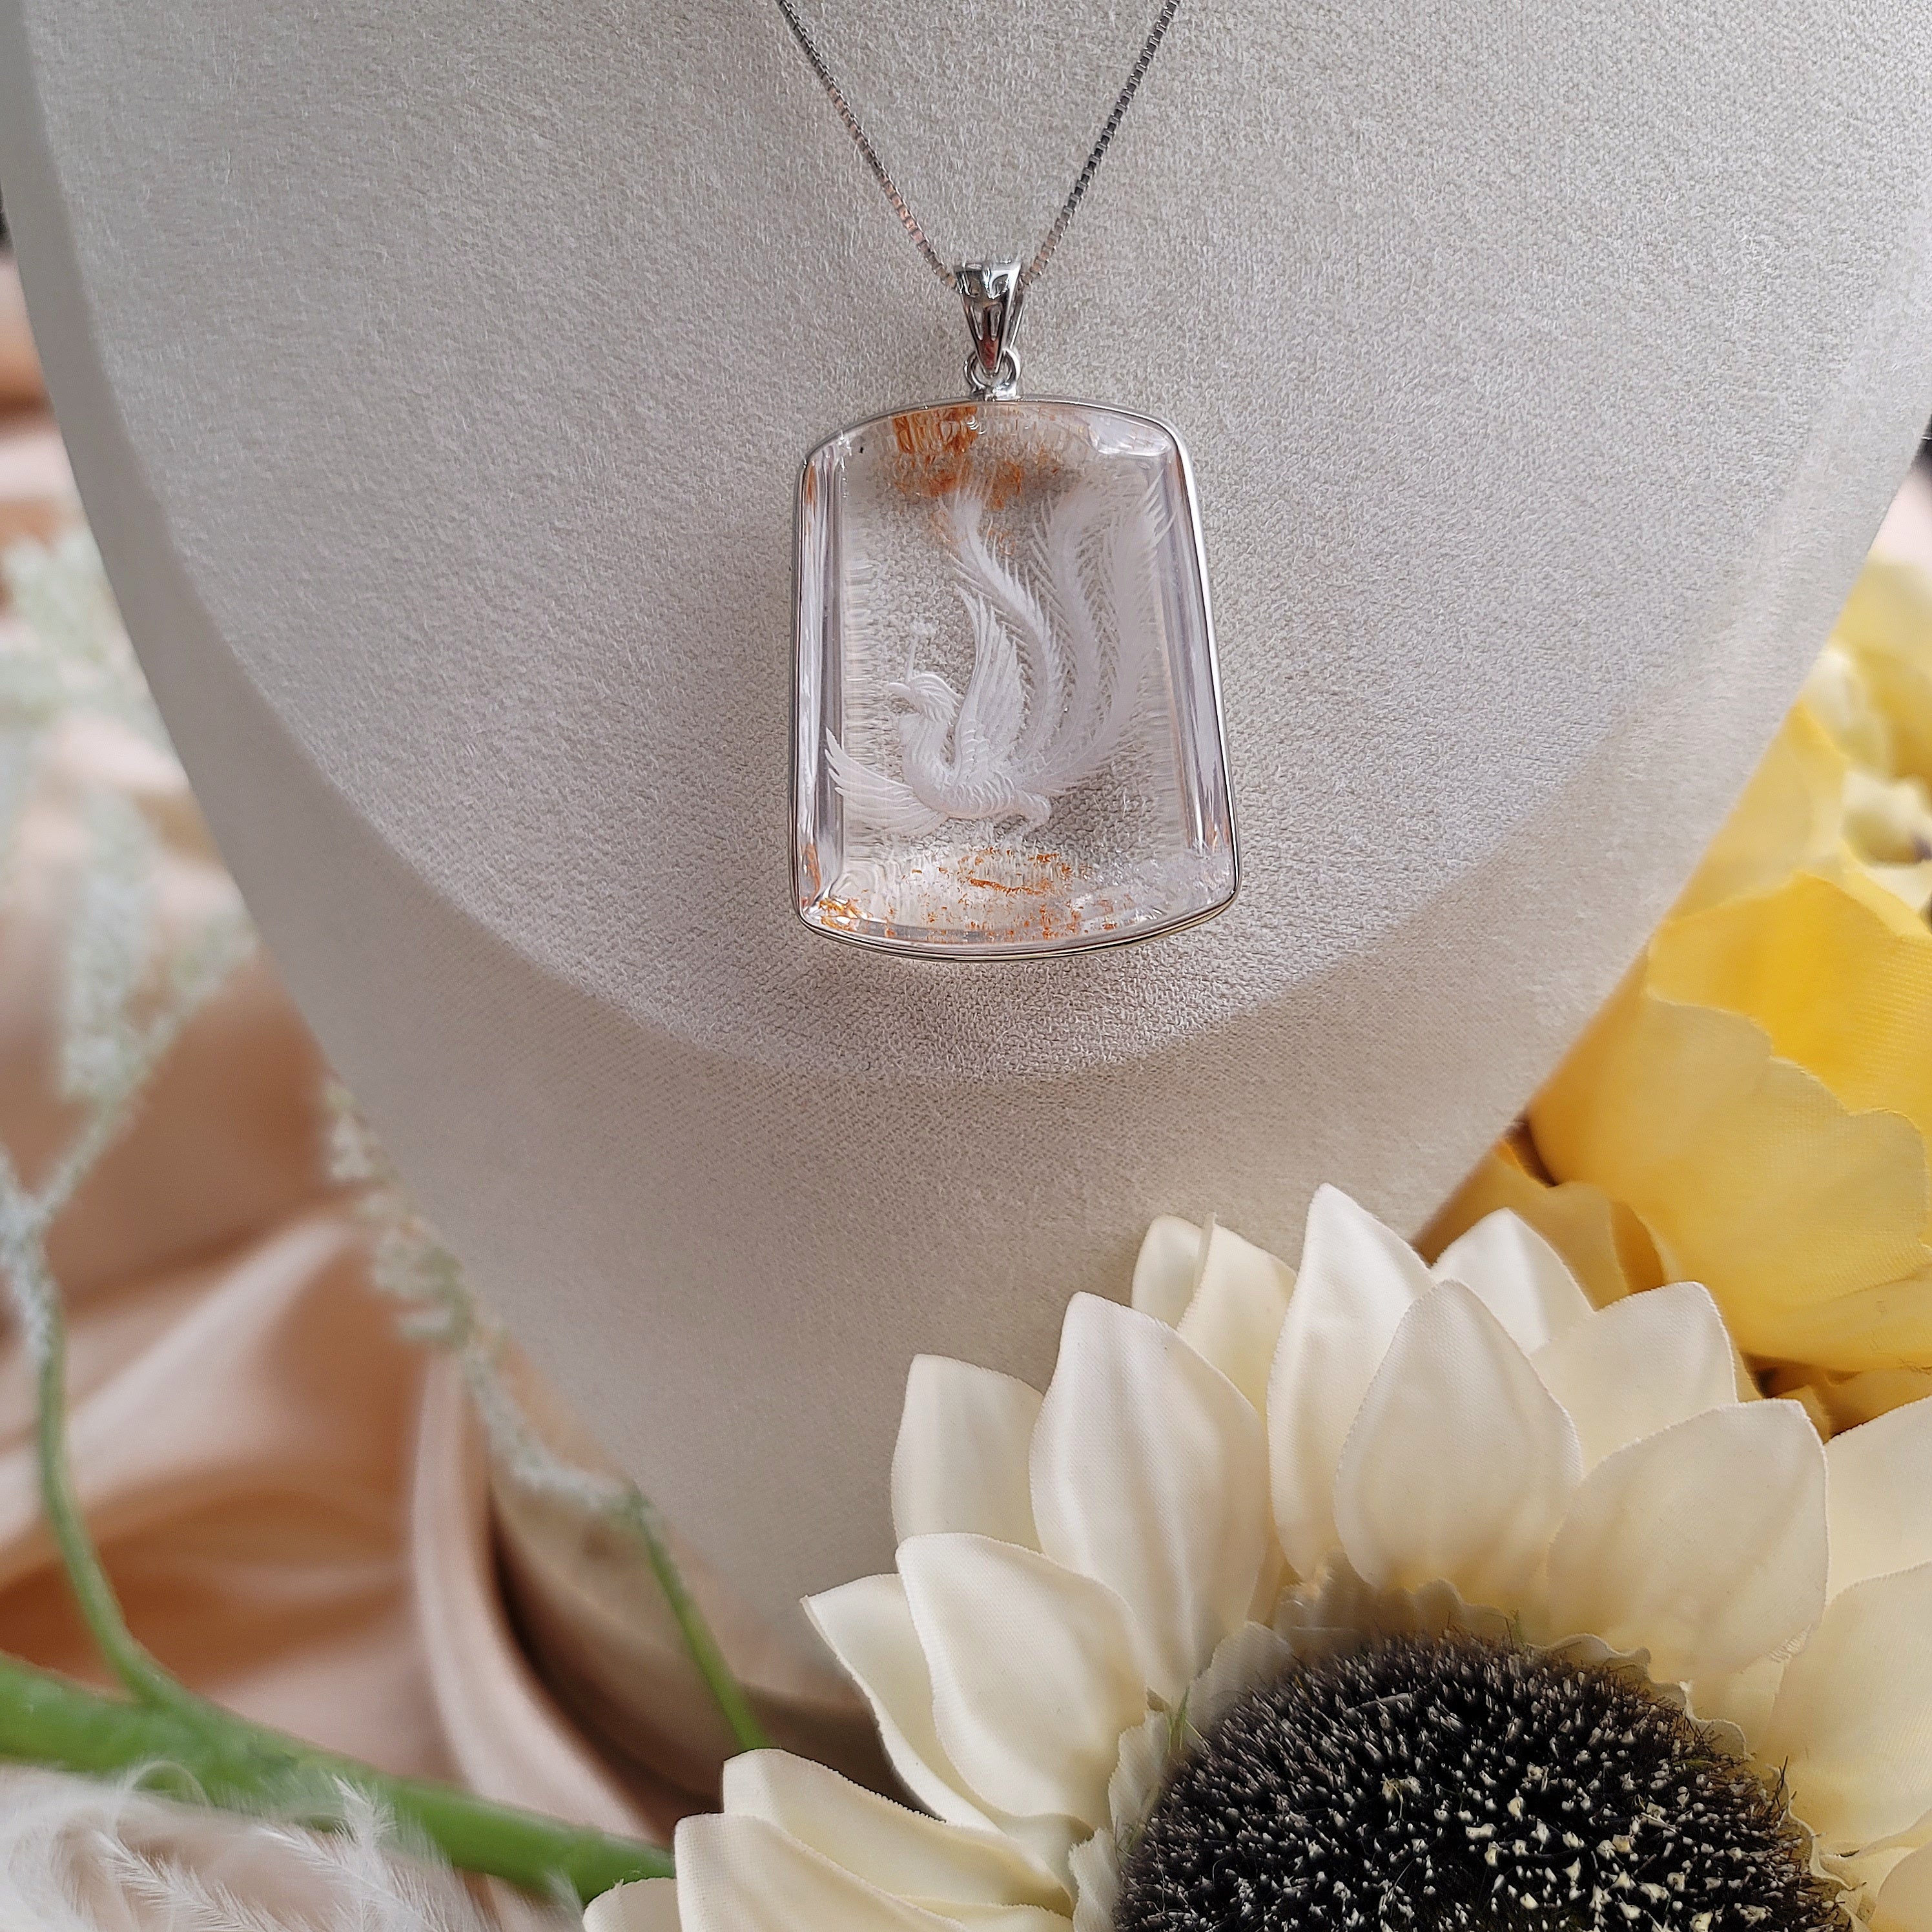 Clear Quartz With Fire Quartz Inclusions Carved Necklace For Healing, Intention Setting and Manifesting